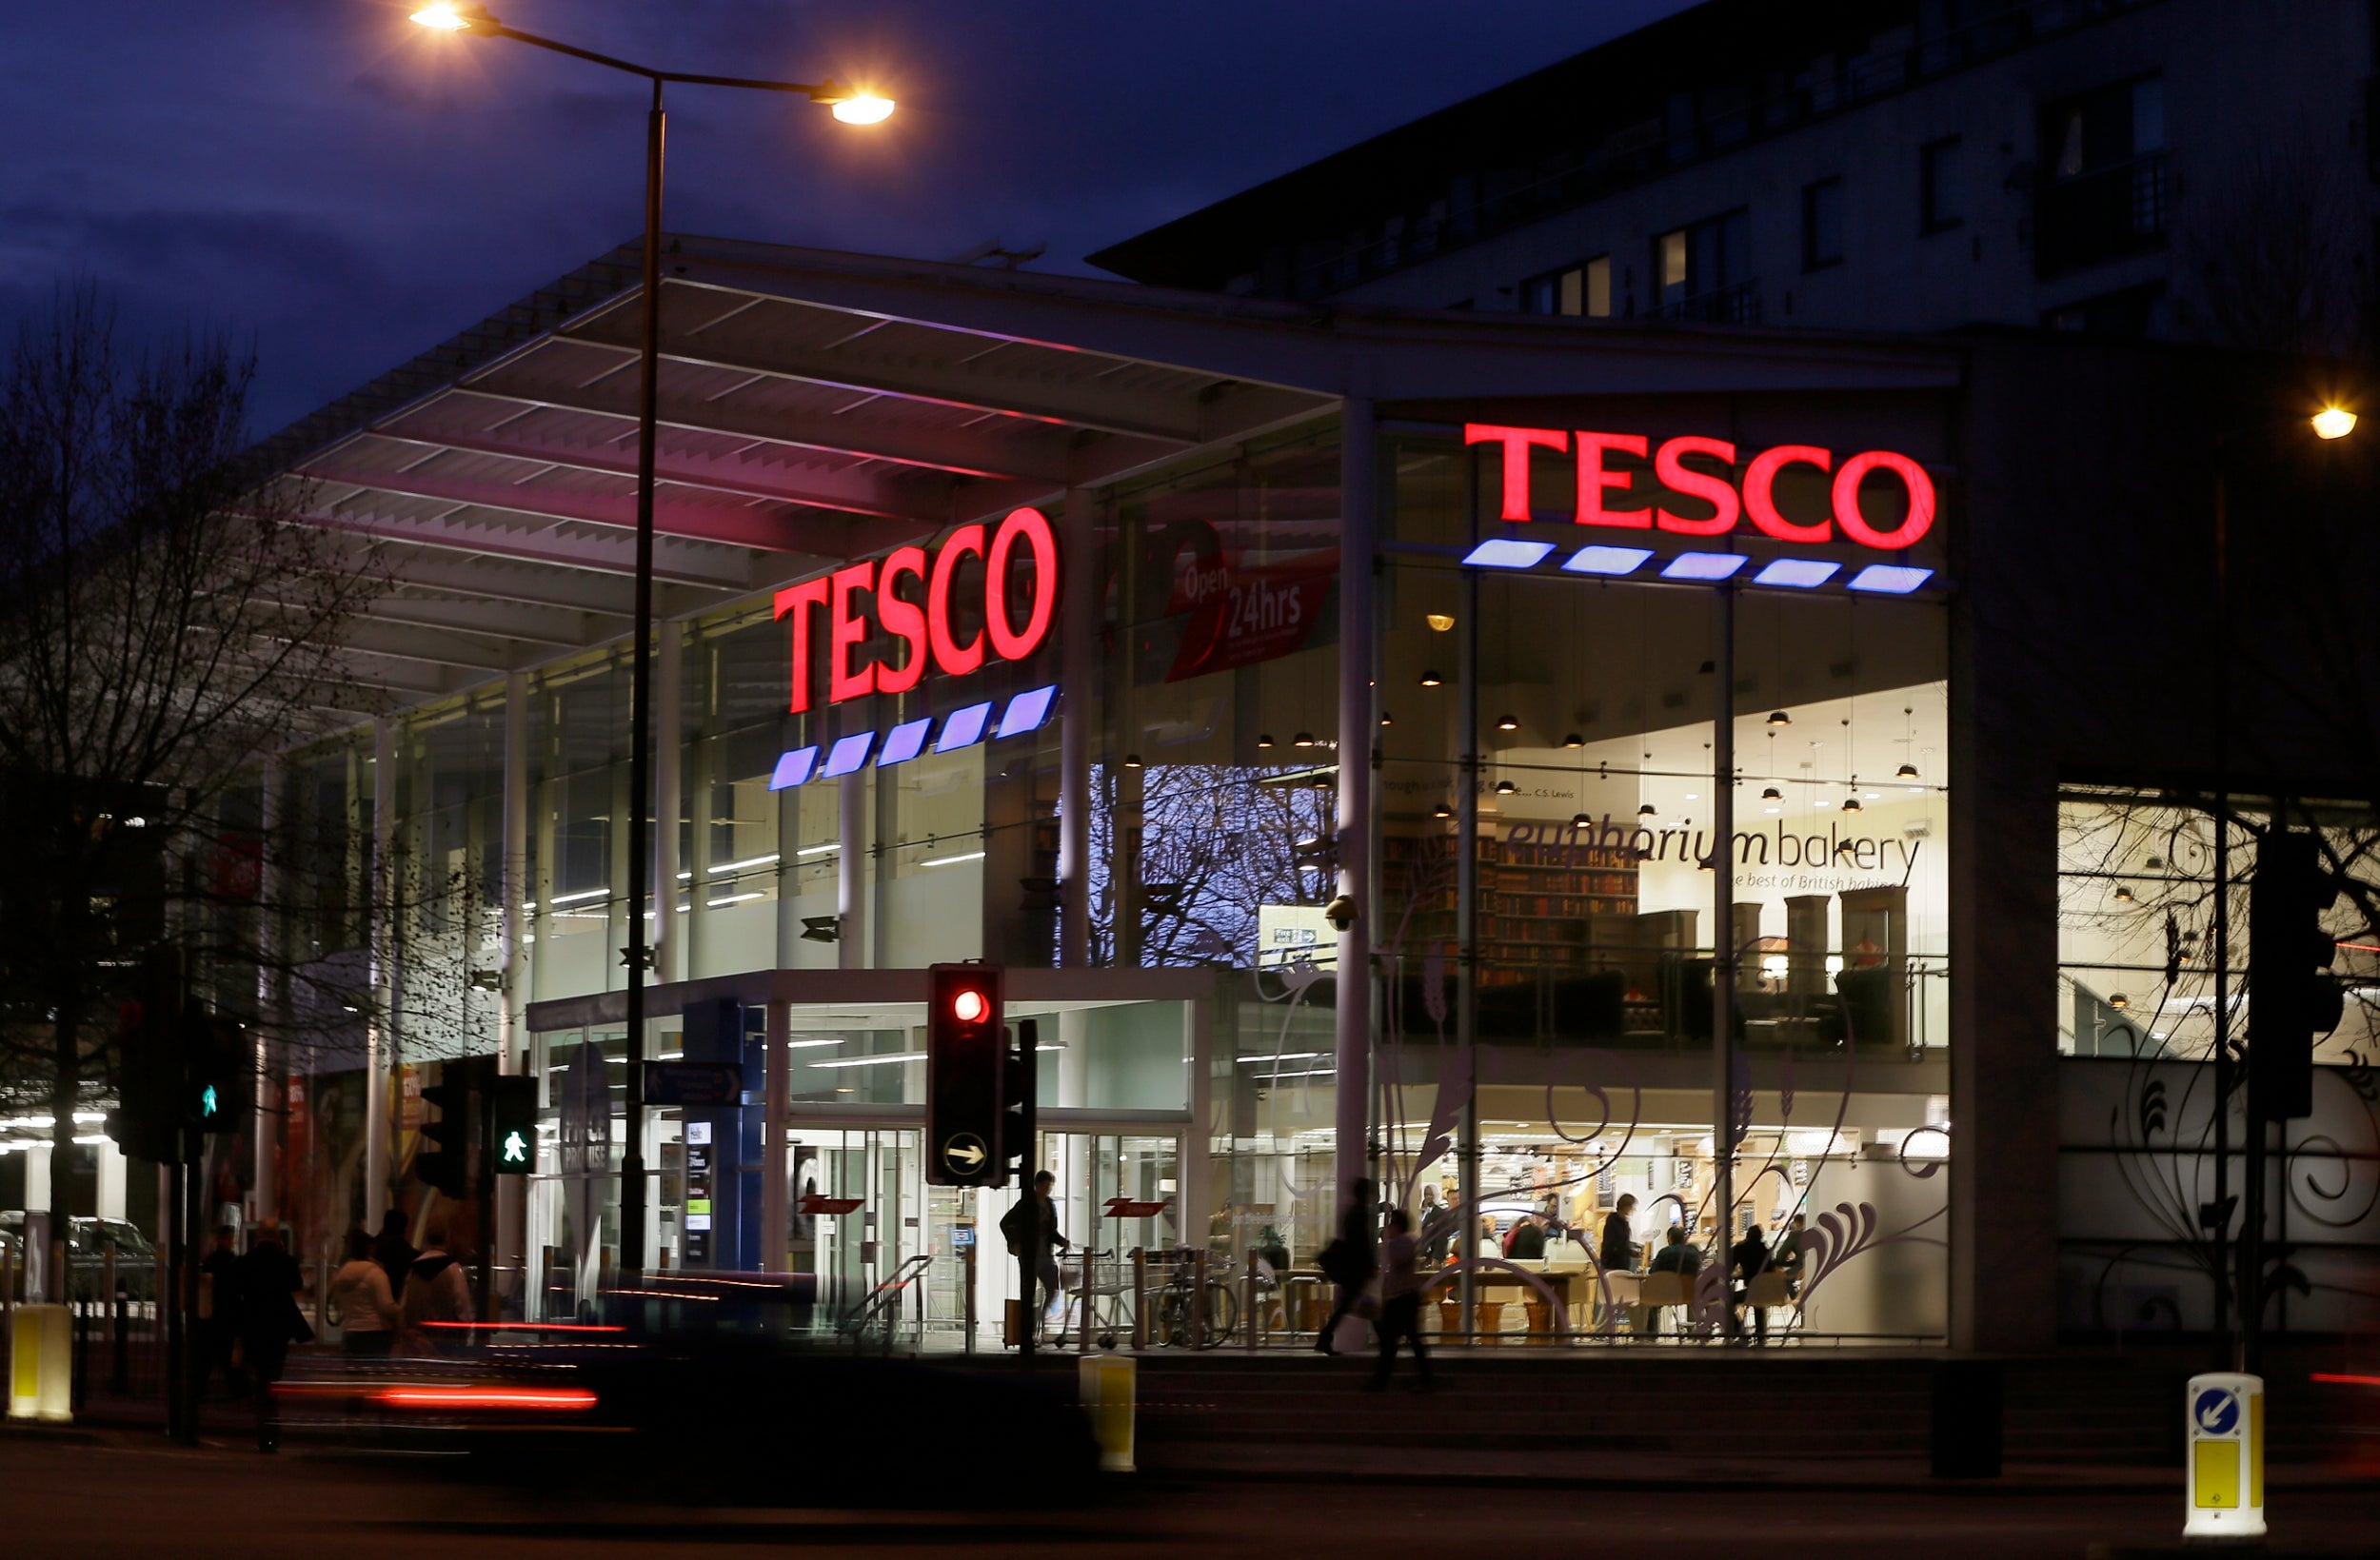 It marks the end of criminal proceedings against three Tesco executives accused over their roles in a 2014 accounting scandal